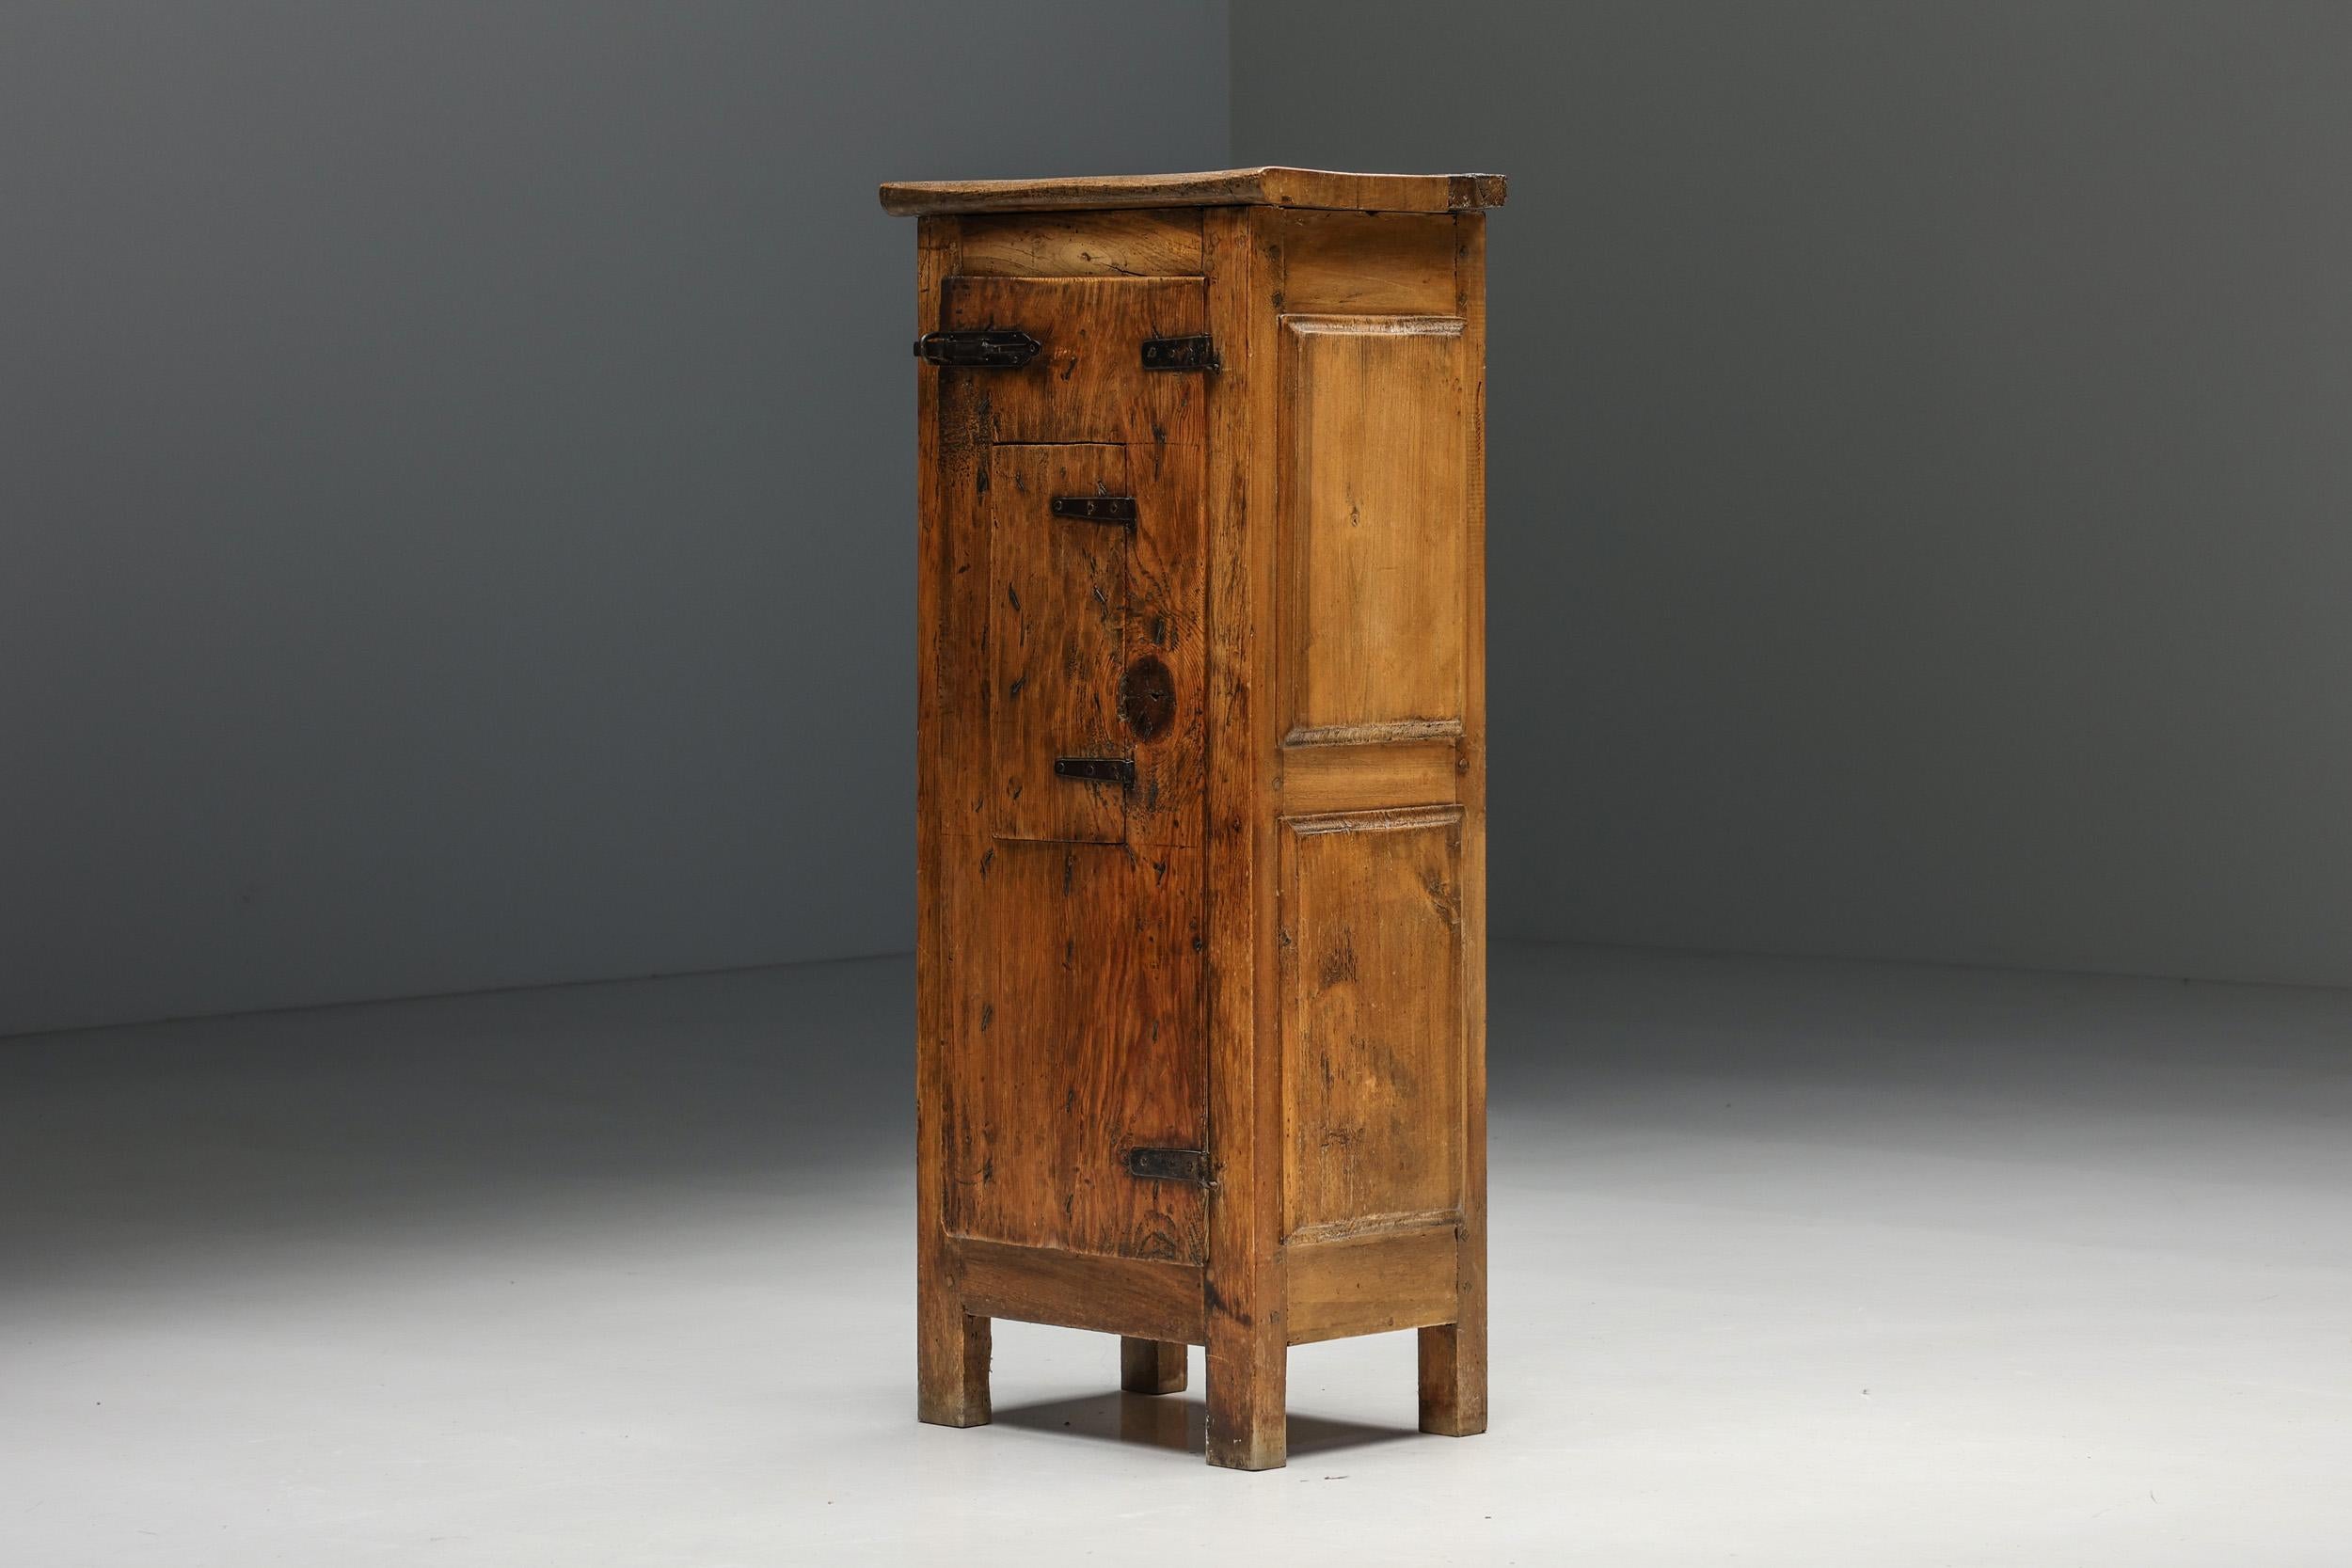 Rustic; Wabi Sabi; Robust; Raw; Cabinet; Confiturier; Artisan Solid Wood; French Craftsmanship; Circa 1900; 20th Century; Breton; Haute Savoie; Auvergnat;

This raw cabinet, made of artisan solid wood, has plenty of space to display and store